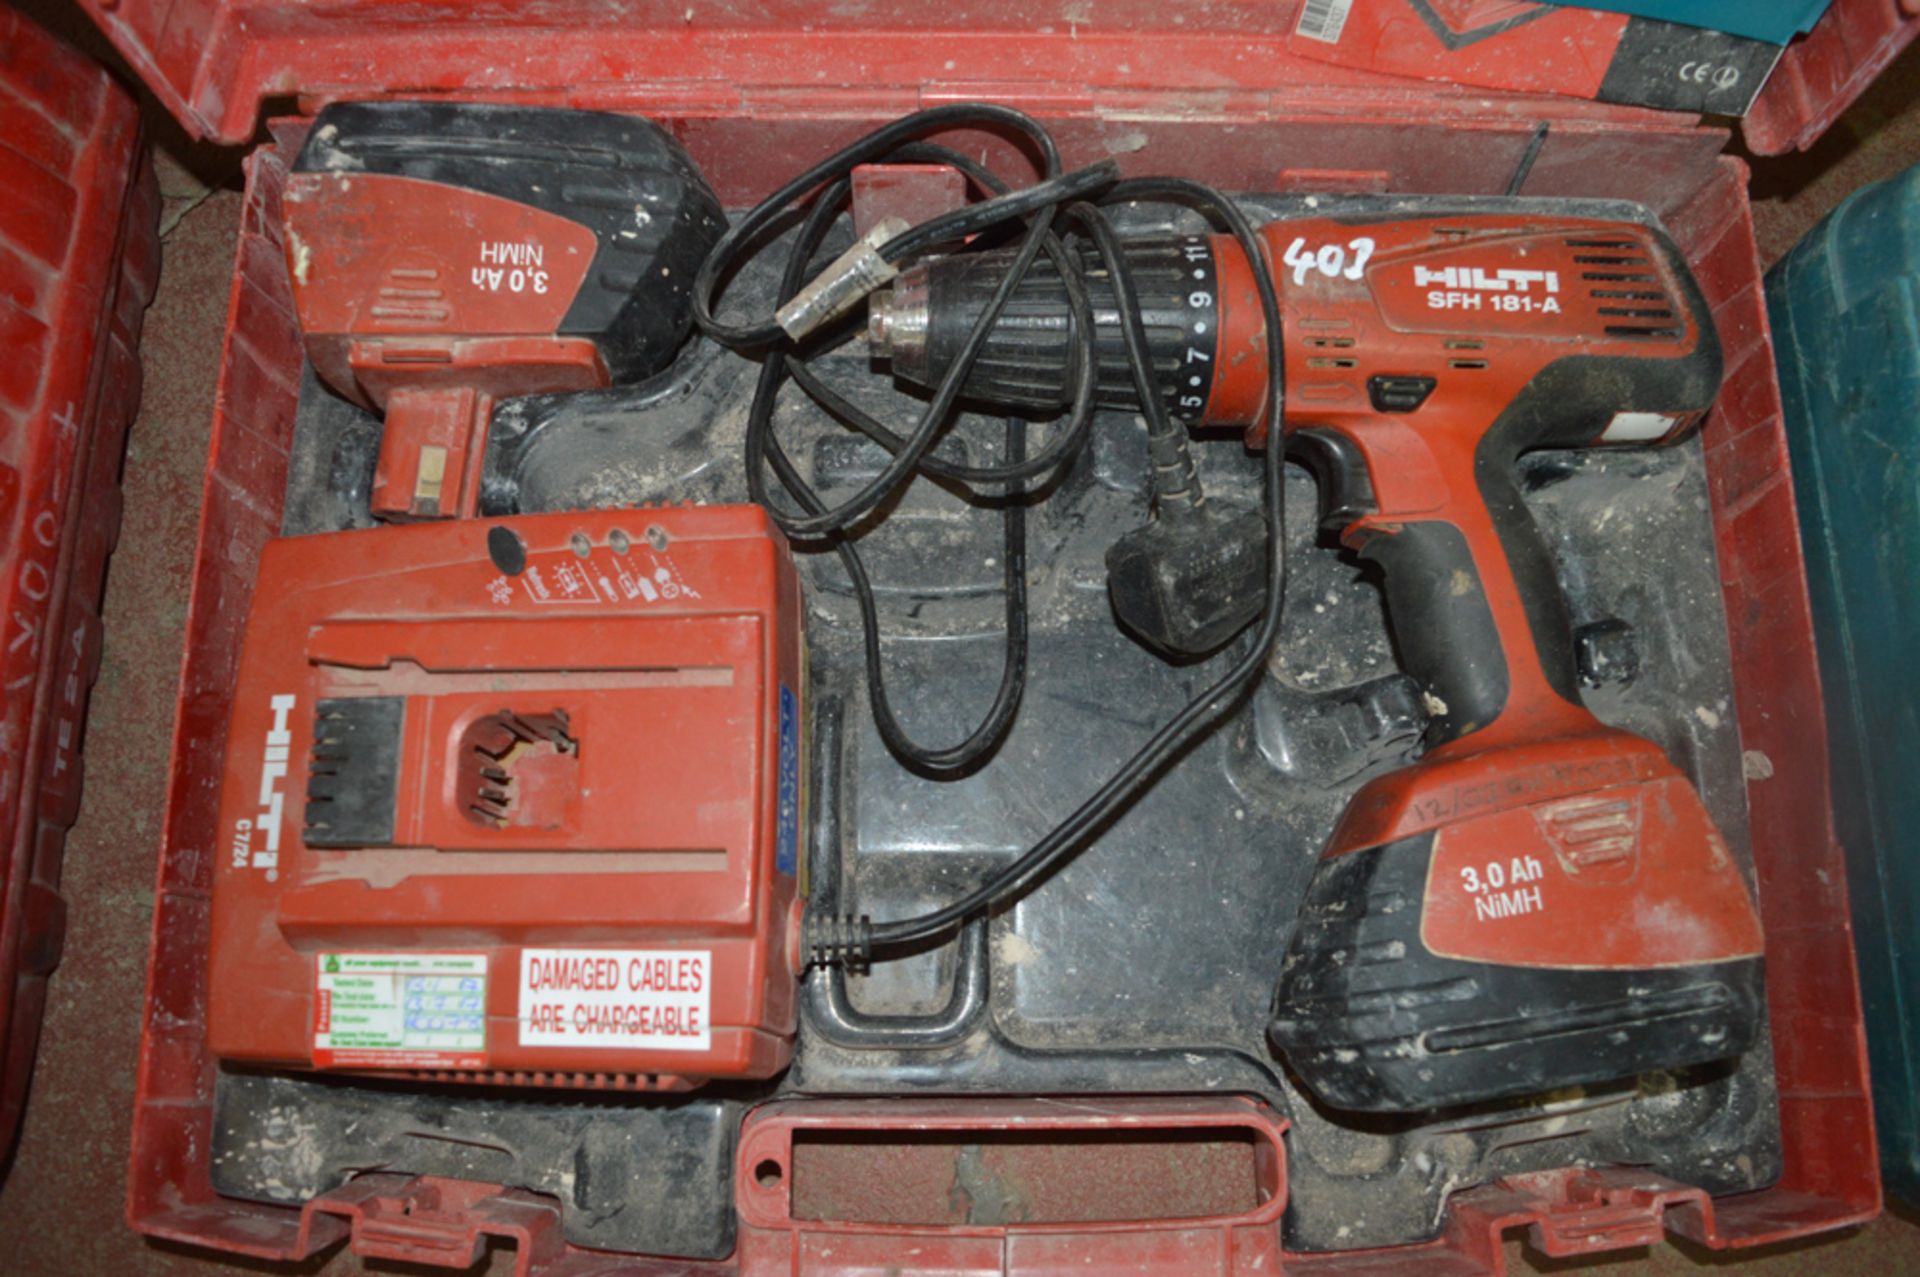 Hilti SFH 181-A 18v cordless drill c/w 2 batteries, charger & carry case 0204-20078